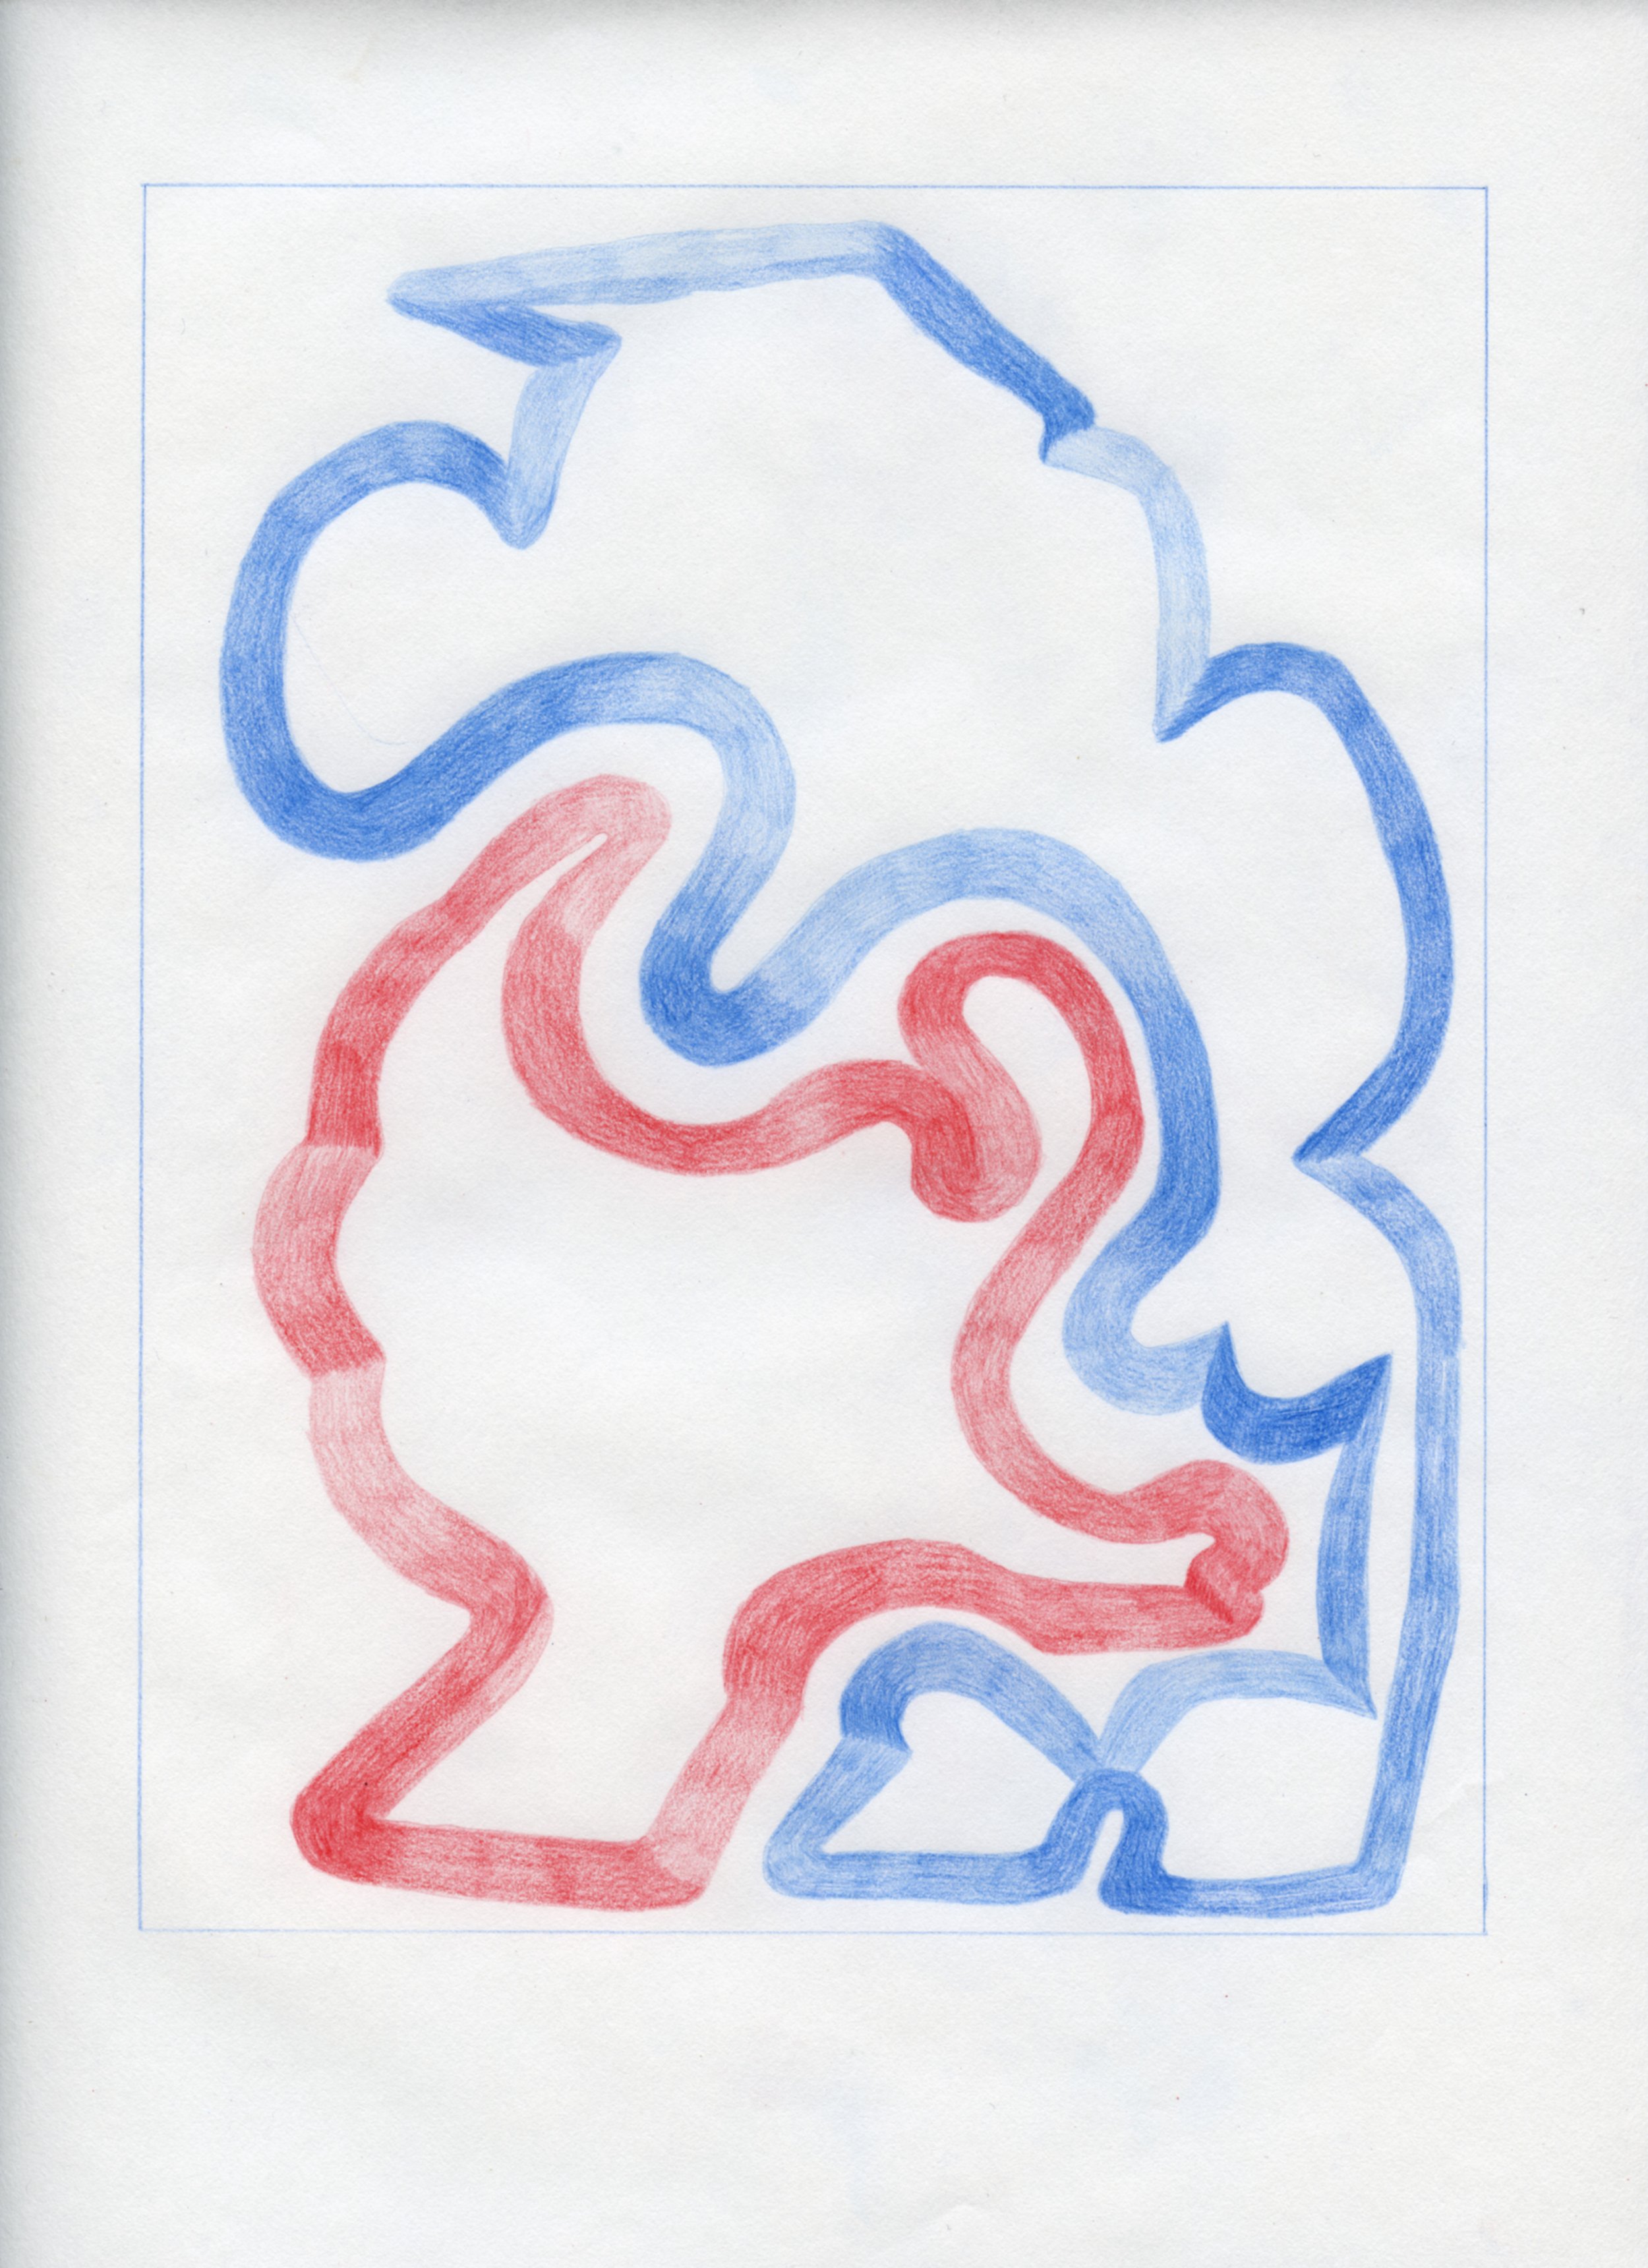  Workplace Drawing #28, 2021, Red and Blue Graphite on Bond Paper, 9”x 12”. 